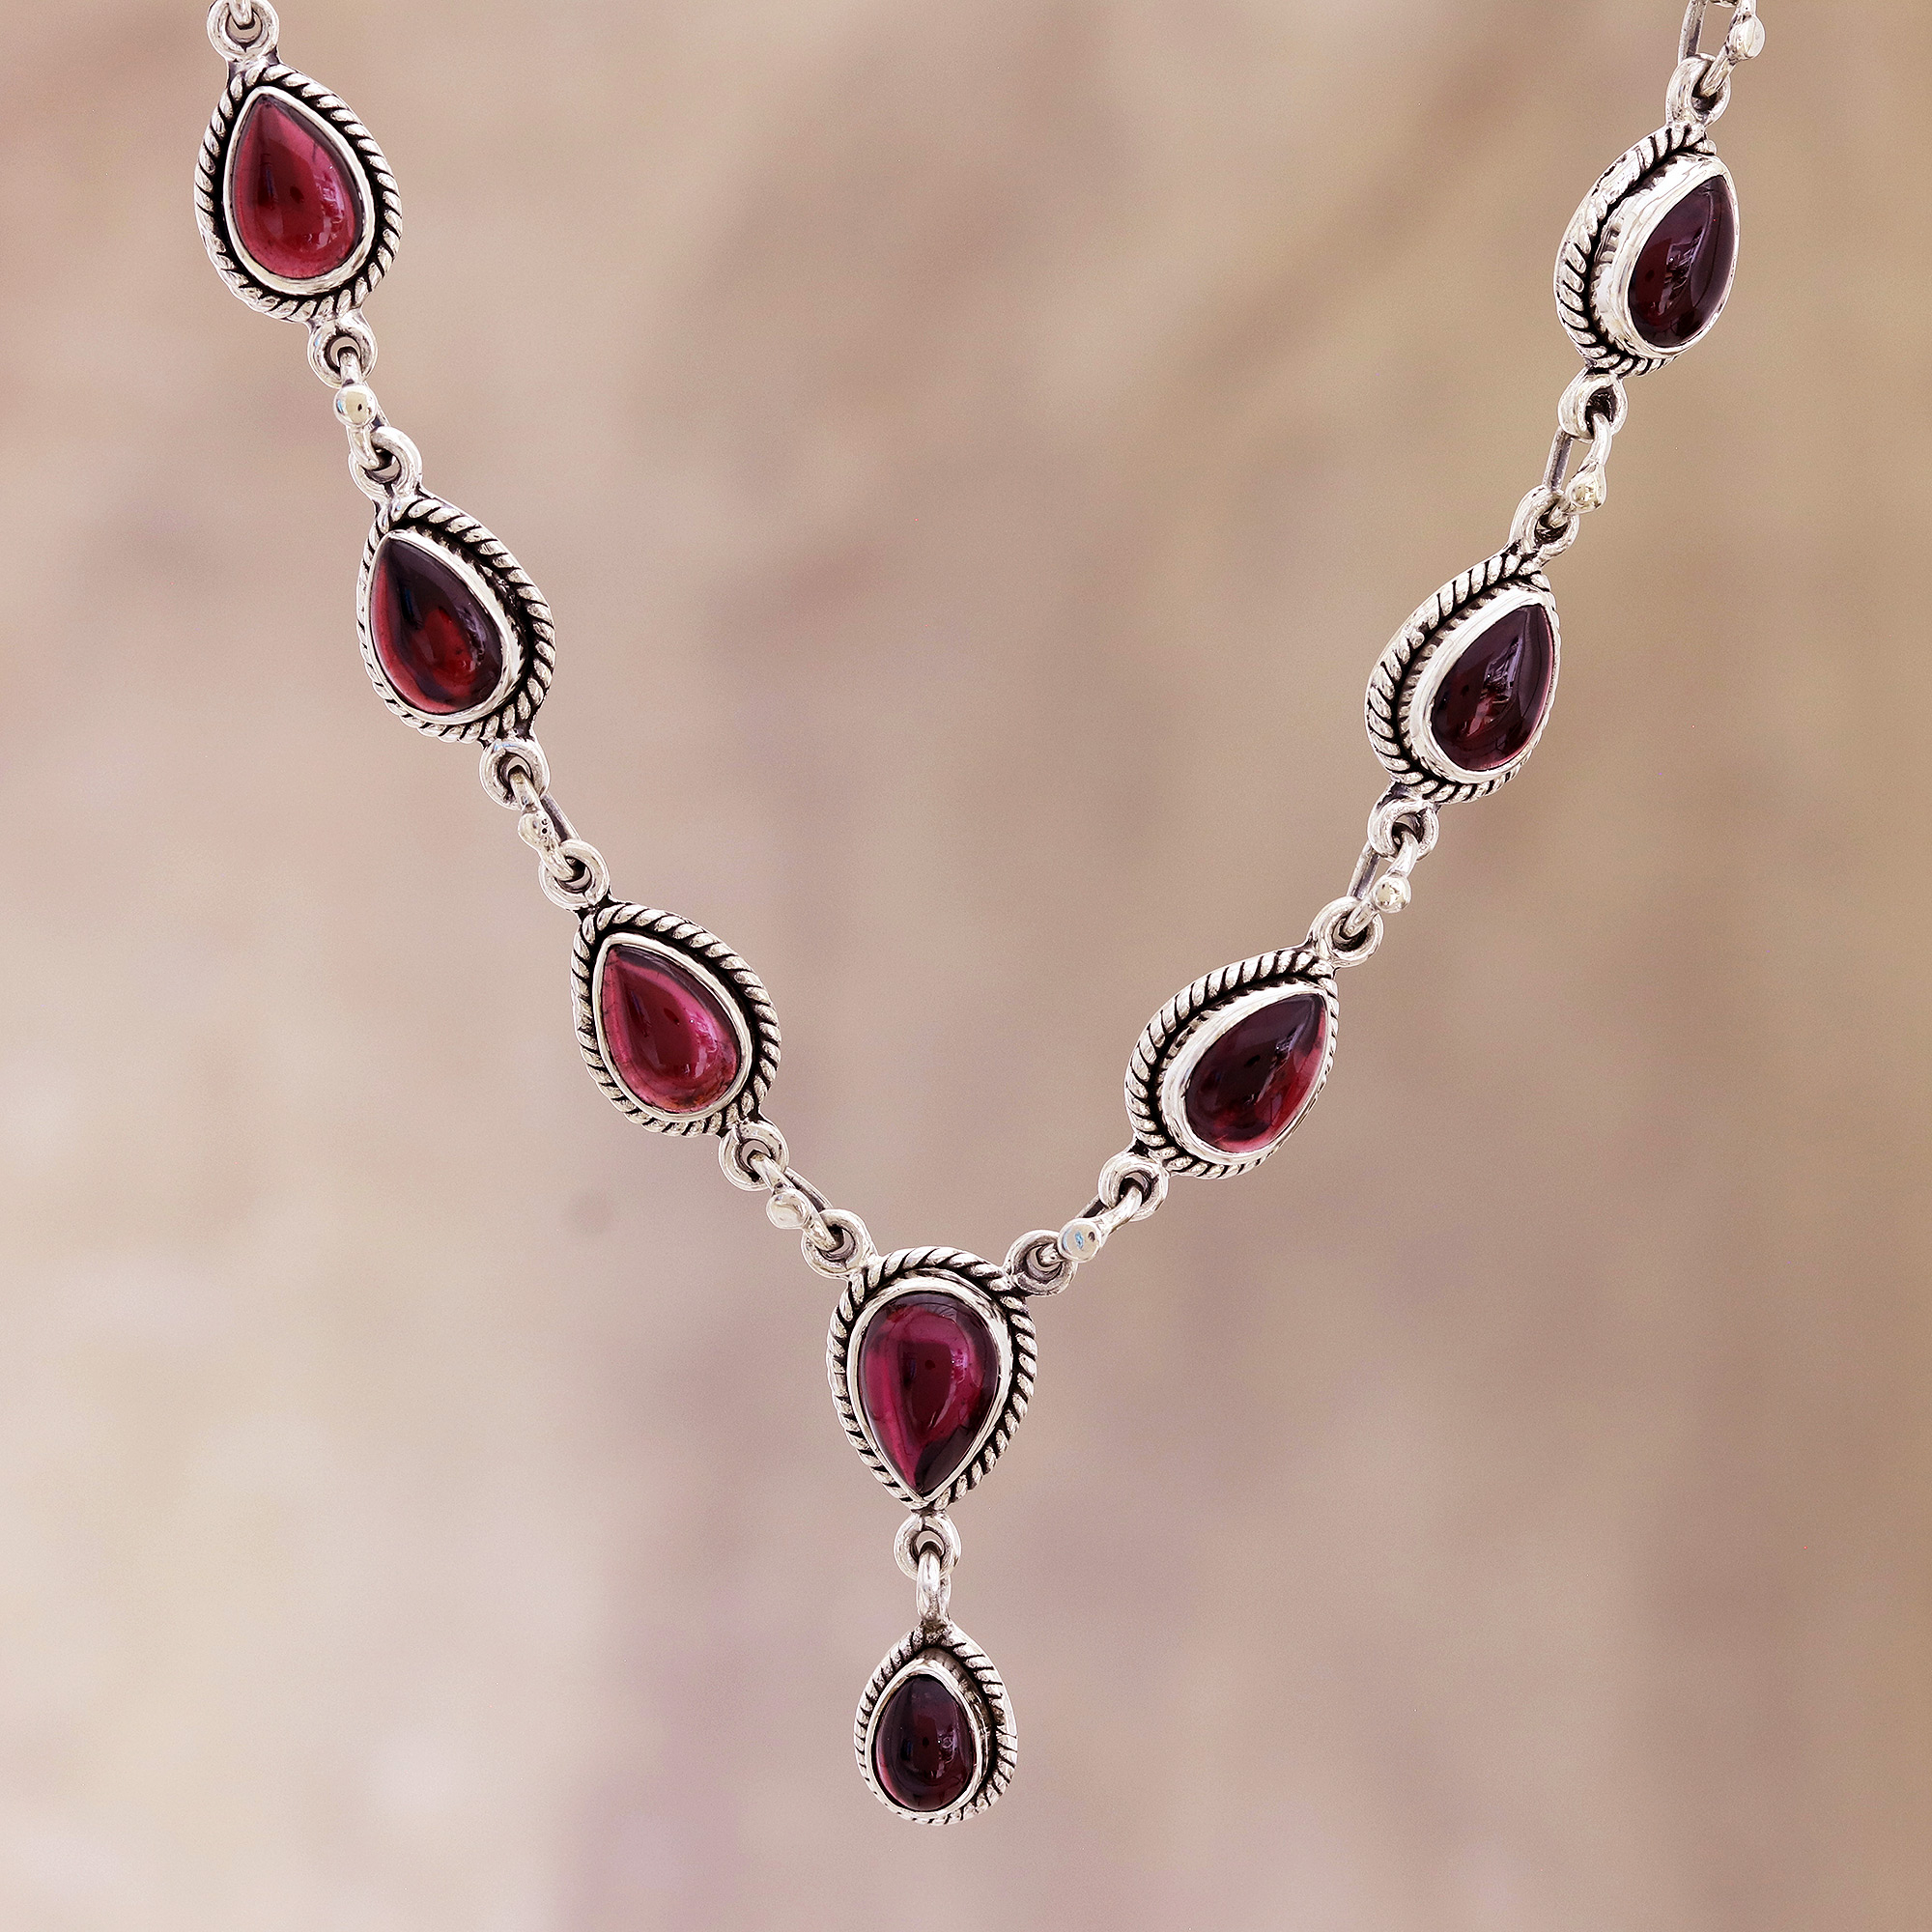 Sterling Silver Real Cabochon Garnet Necklace Pendant 1" Made In India 